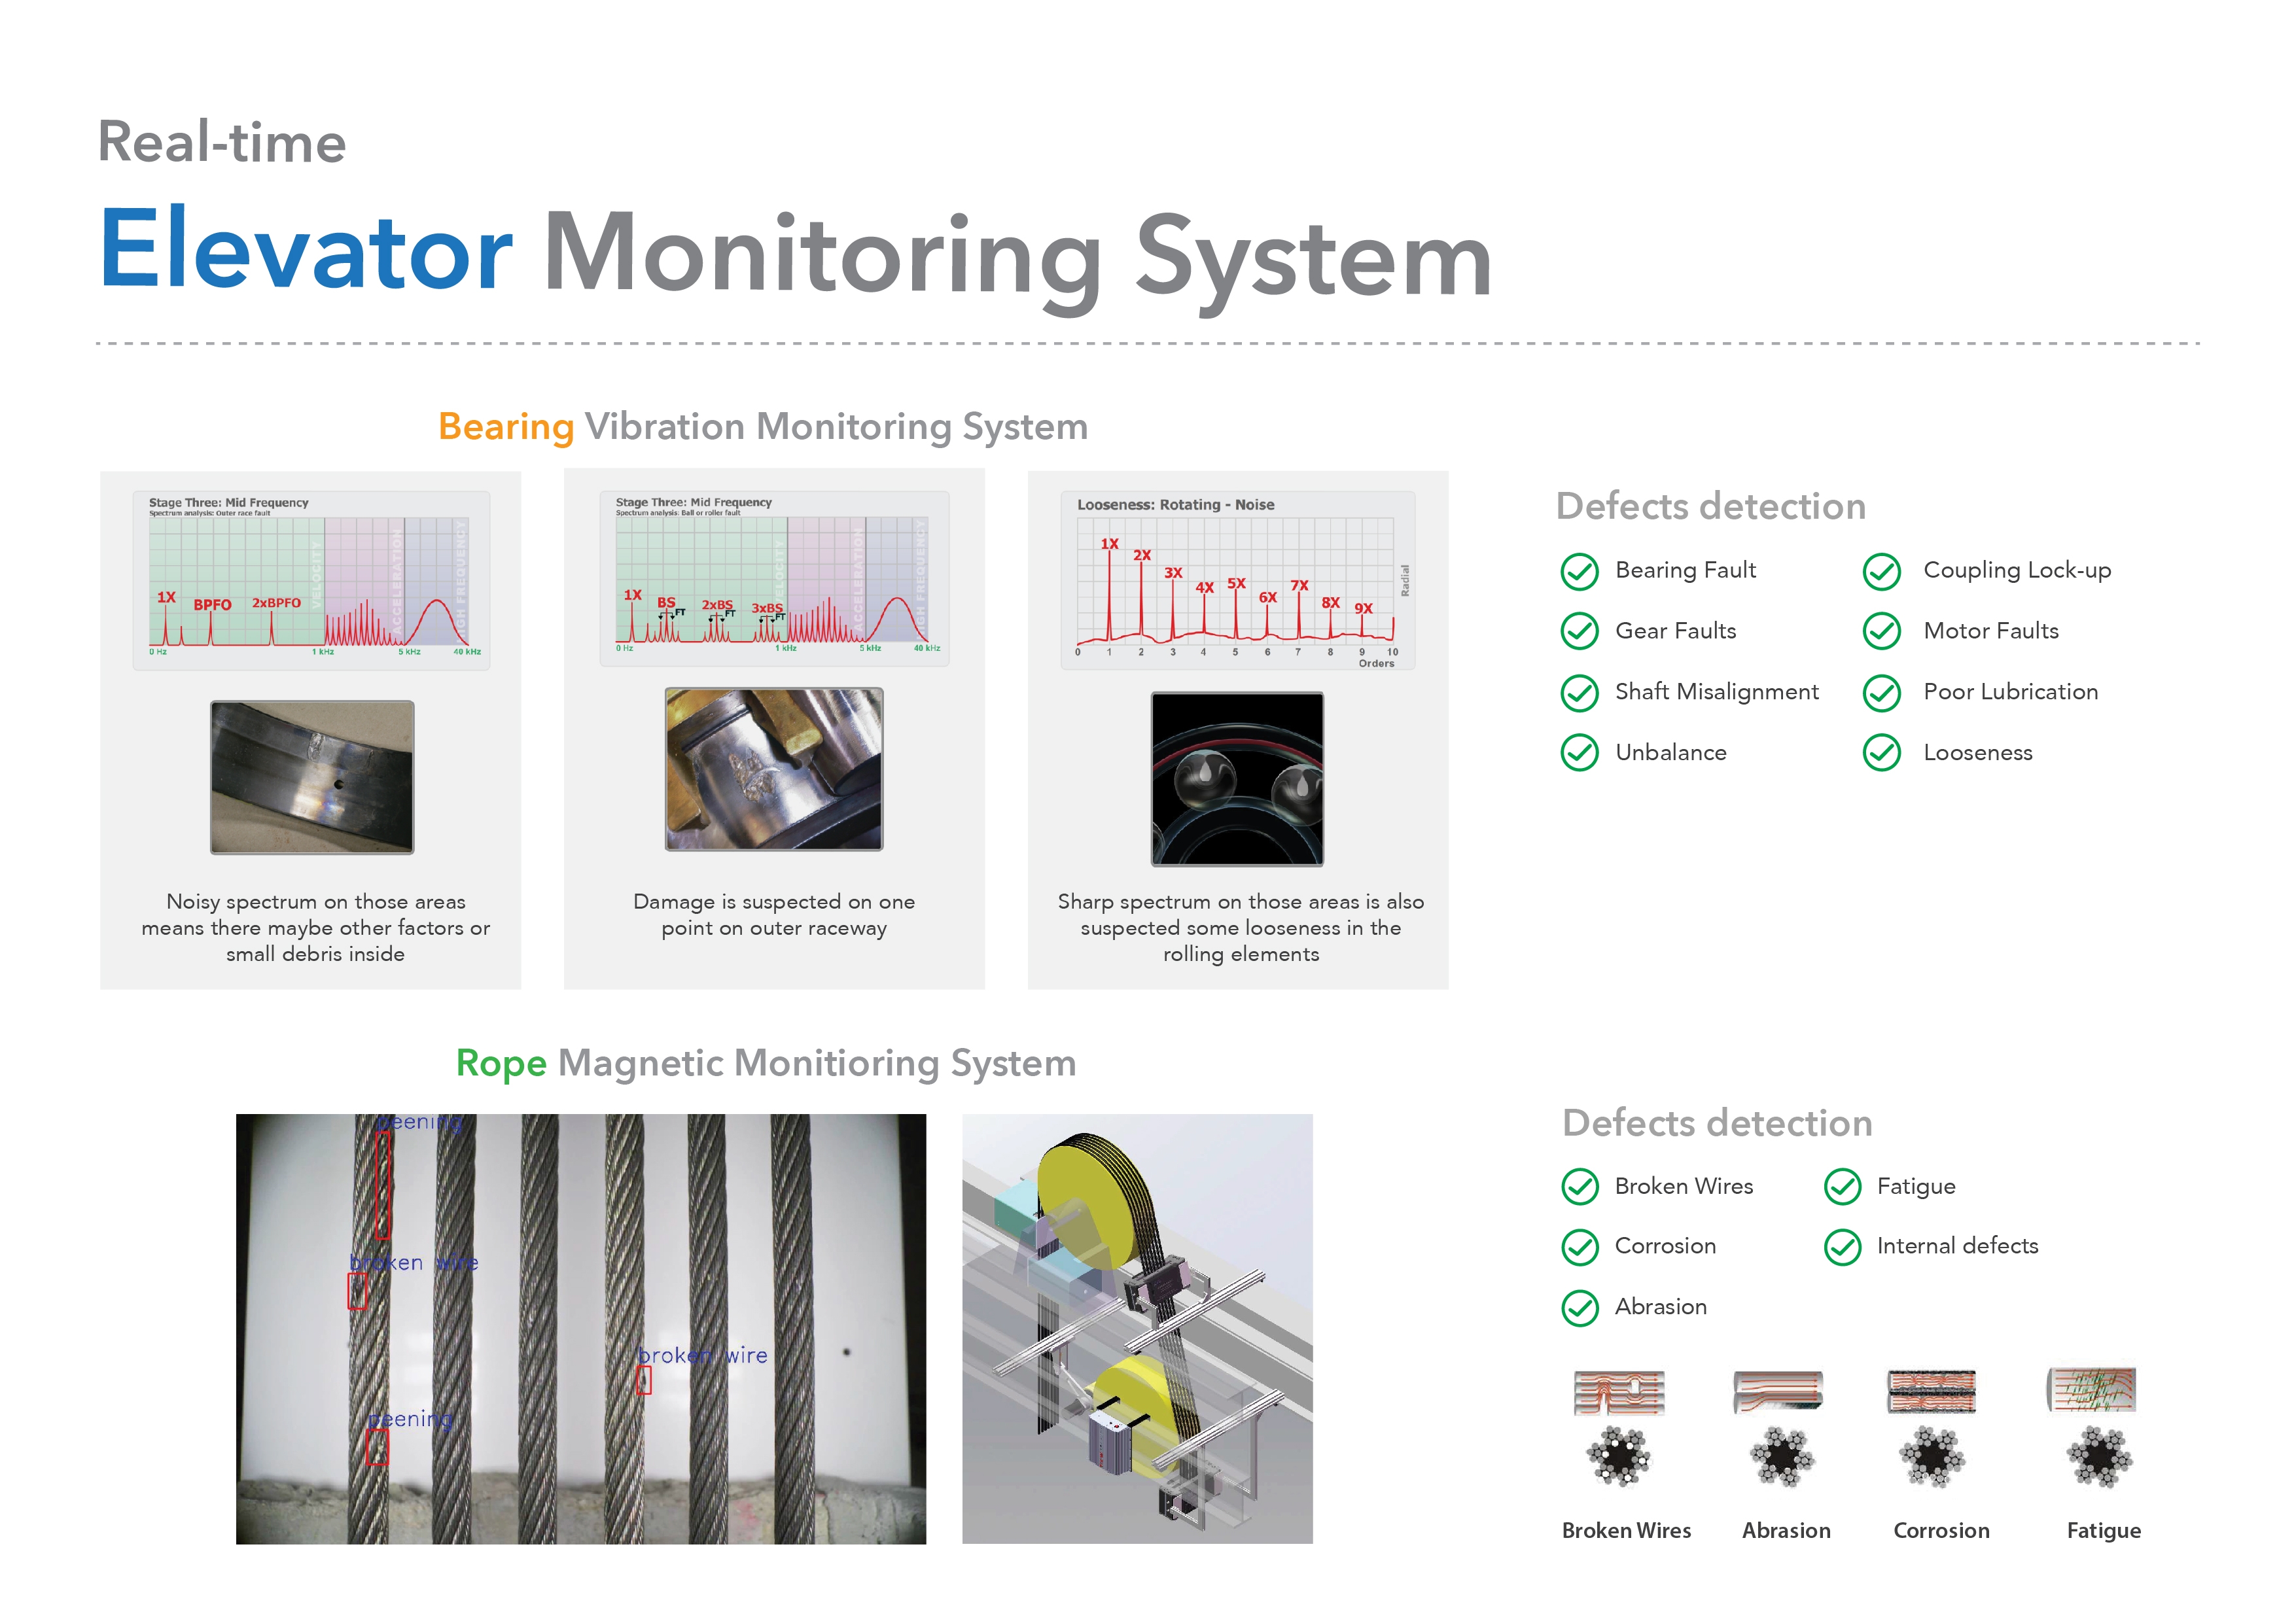 Picture: RaSpect’s real-time elevator monitoring solution.